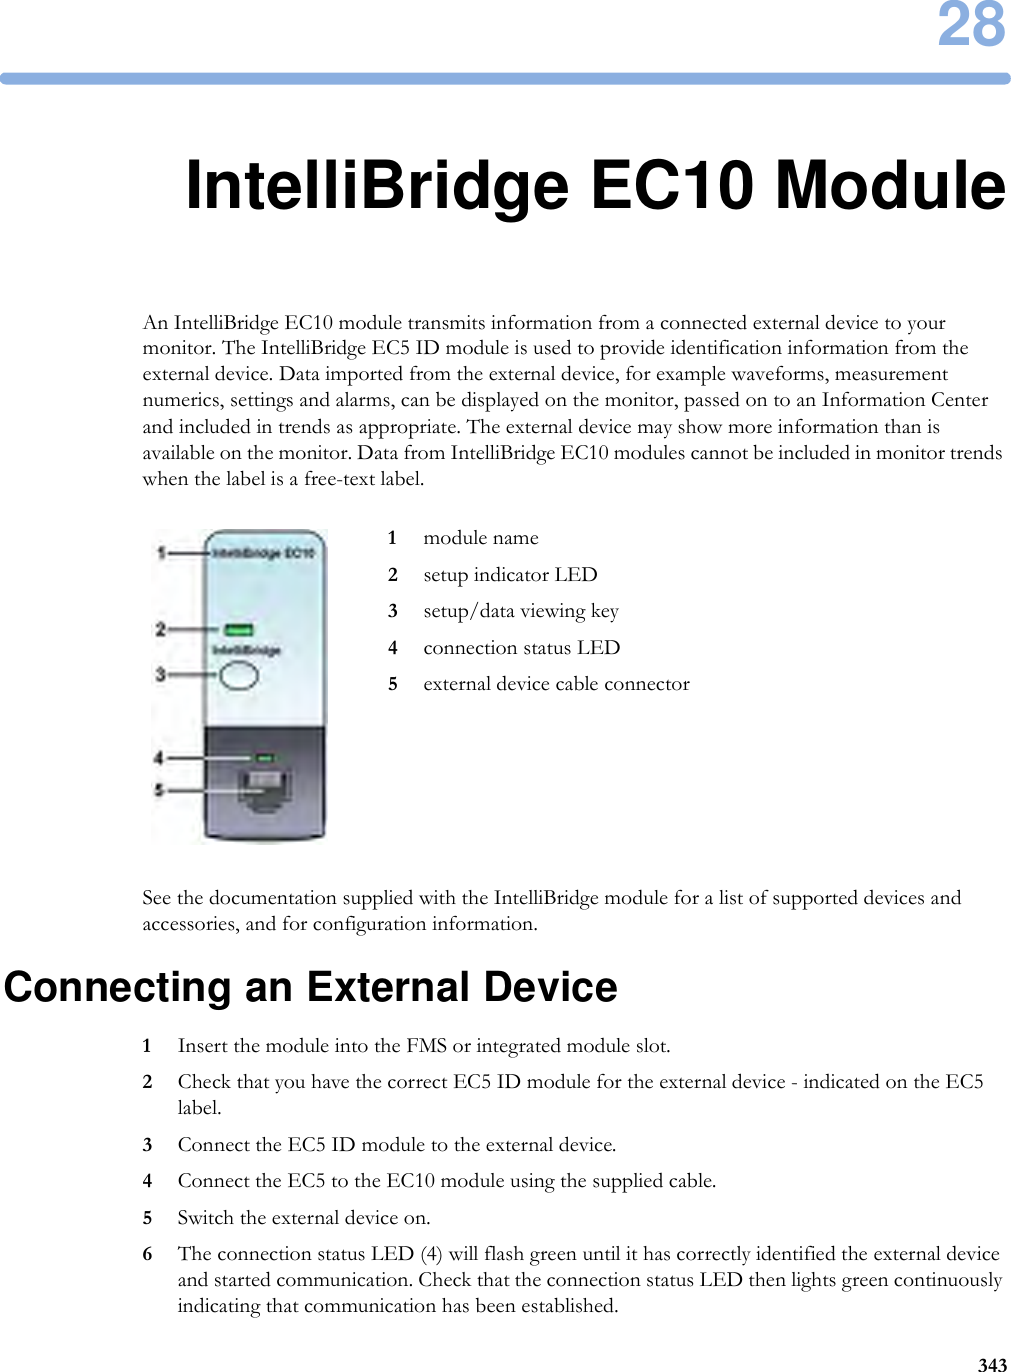 2834328IntelliBridge EC10 ModuleAn IntelliBridge EC10 module transmits information from a connected external device to your monitor. The IntelliBridge EC5 ID module is used to provide identification information from the external device. Data imported from the external device, for example waveforms, measurement numerics, settings and alarms, can be displayed on the monitor, passed on to an Information Center and included in trends as appropriate. The external device may show more information than is available on the monitor. Data from IntelliBridge EC10 modules cannot be included in monitor trends when the label is a free-text label.See the documentation supplied with the IntelliBridge module for a list of supported devices and accessories, and for configuration information.Connecting an External Device1Insert the module into the FMS or integrated module slot.2Check that you have the correct EC5 ID module for the external device - indicated on the EC5 label.3Connect the EC5 ID module to the external device.4Connect the EC5 to the EC10 module using the supplied cable.5Switch the external device on.6The connection status LED (4) will flash green until it has correctly identified the external device and started communication. Check that the connection status LED then lights green continuously indicating that communication has been established.1module name2setup indicator LED3setup/data viewing key4connection status LED5external device cable connector